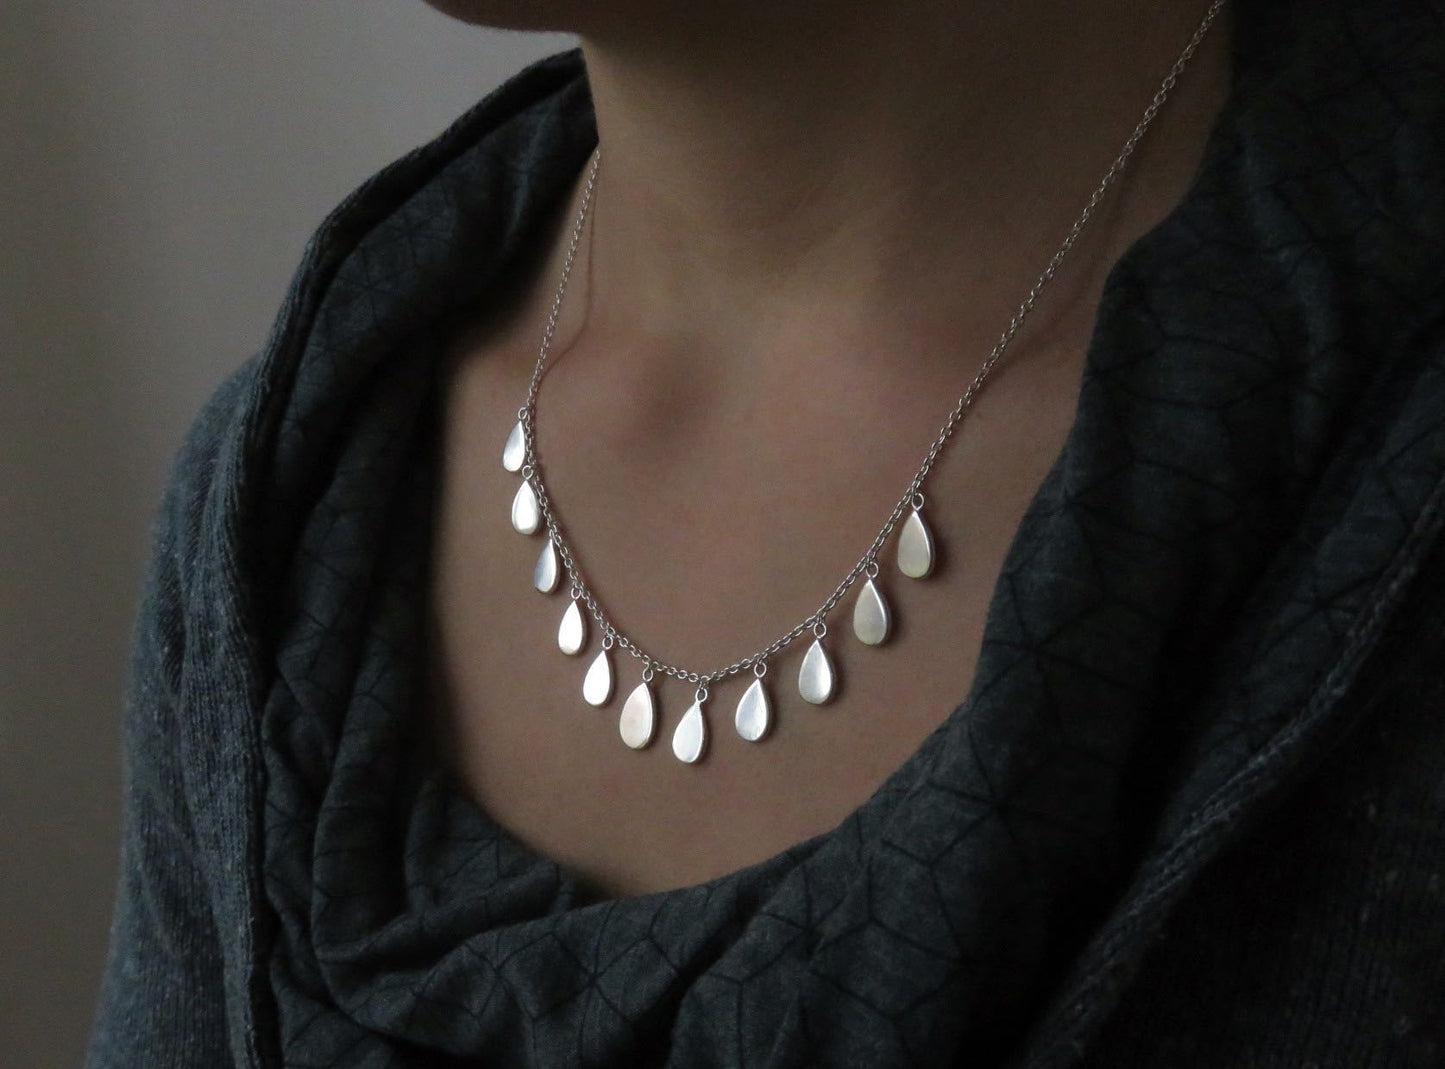 Necklace with small teardrop-shaped pendants made of silver 